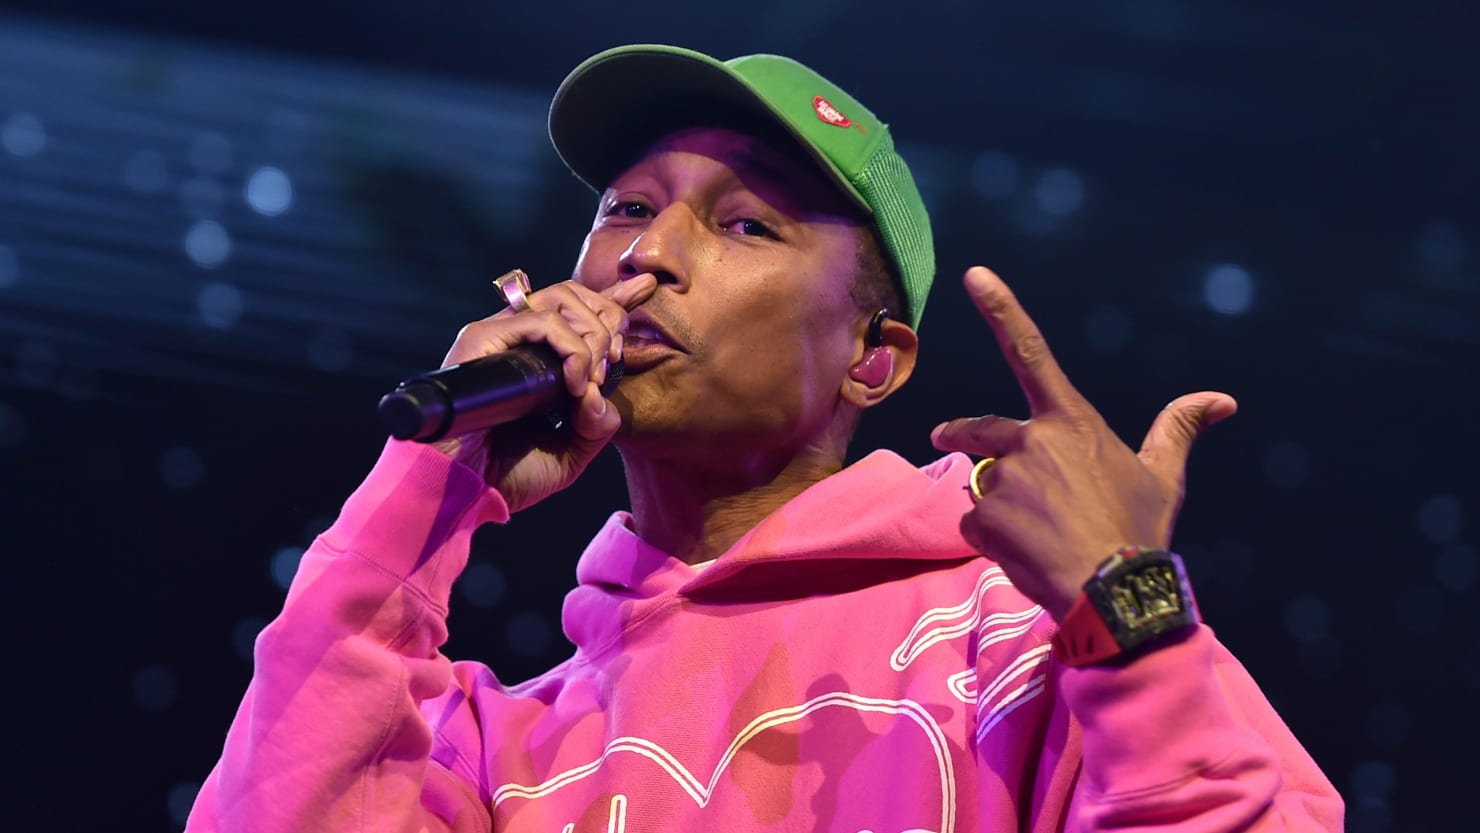 Pharrell Williams to Trump: Stop Playing ‘Happy’ at Rallies